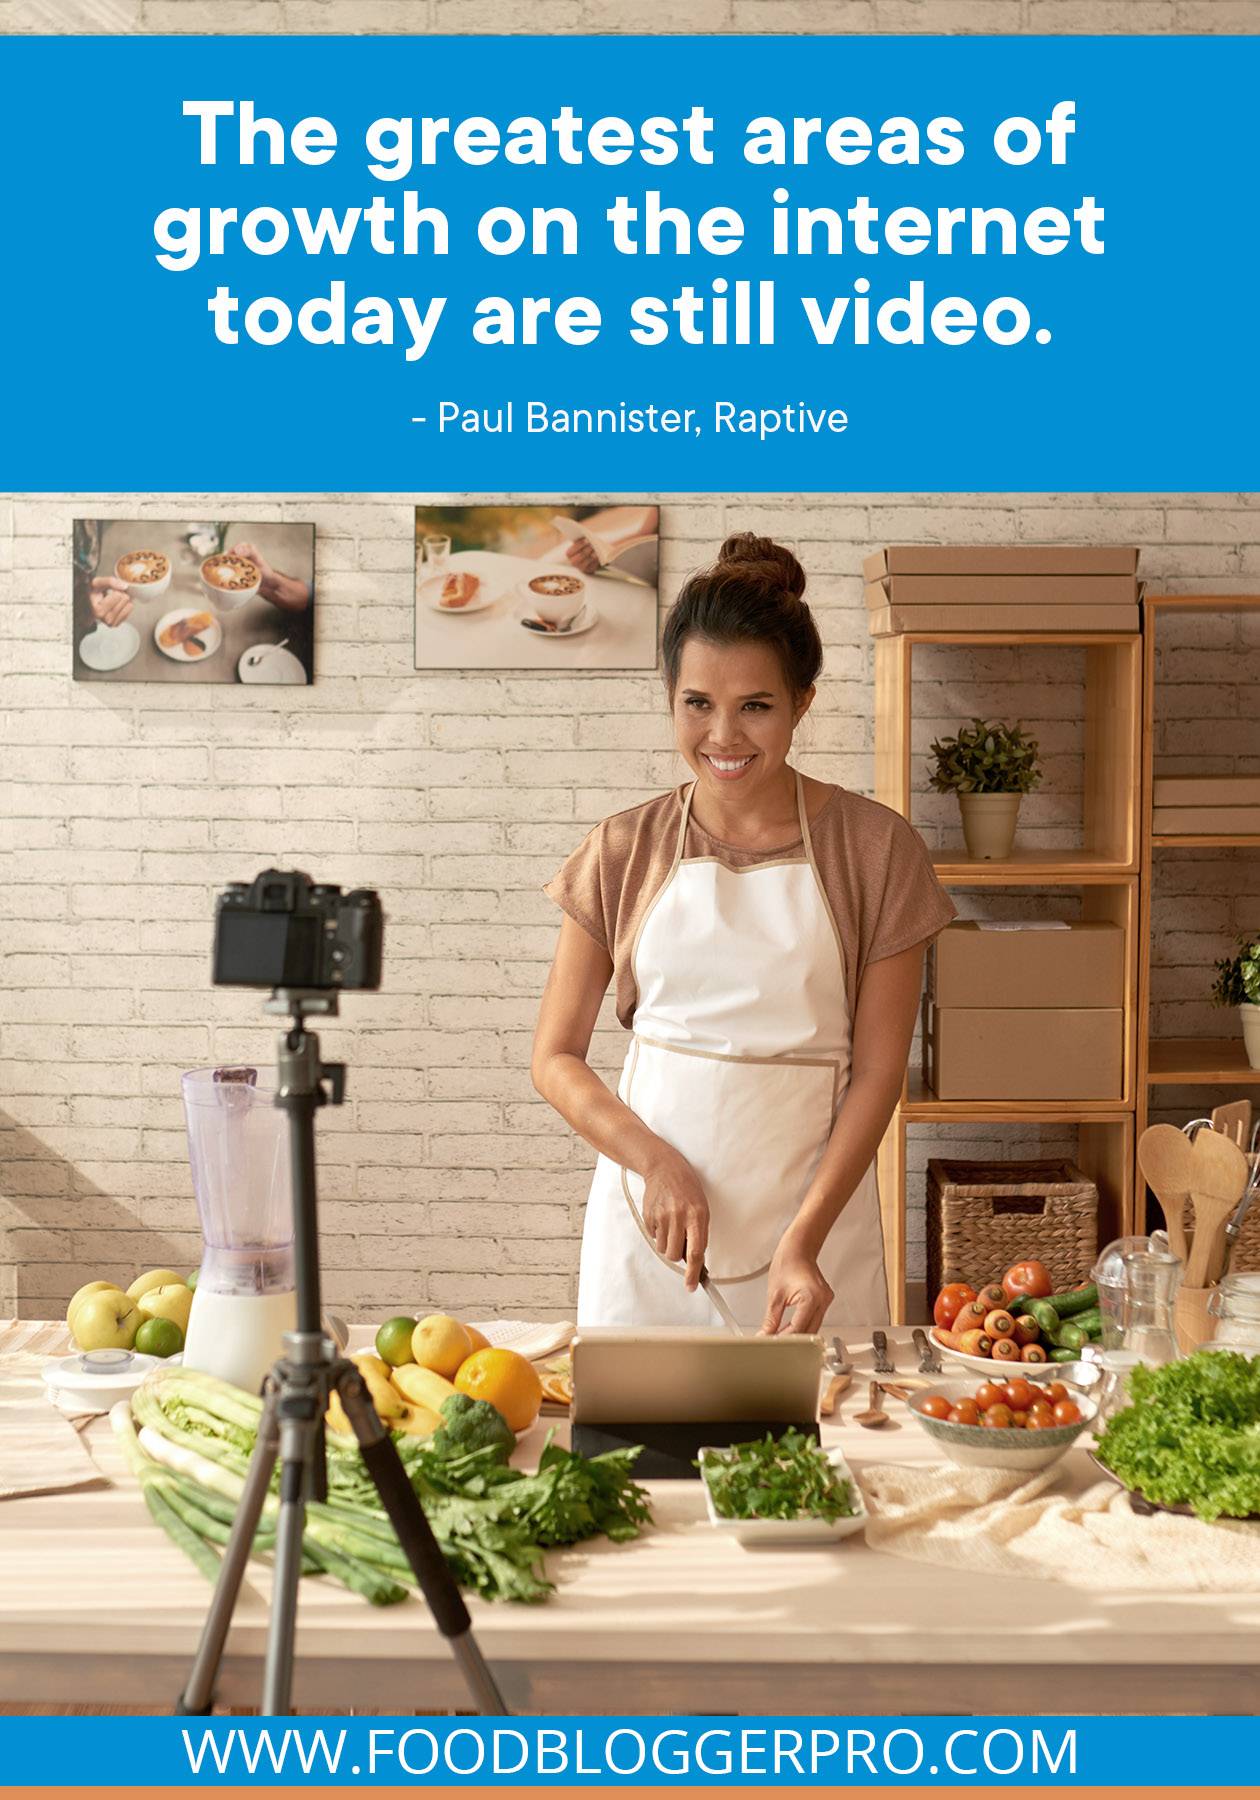 A photograph of a woman filming a recipe video with a quote from Paul Bannister's episode of The Food Blogger Pro Podcast, "The greatest areas of growth on the internet today are still video." 